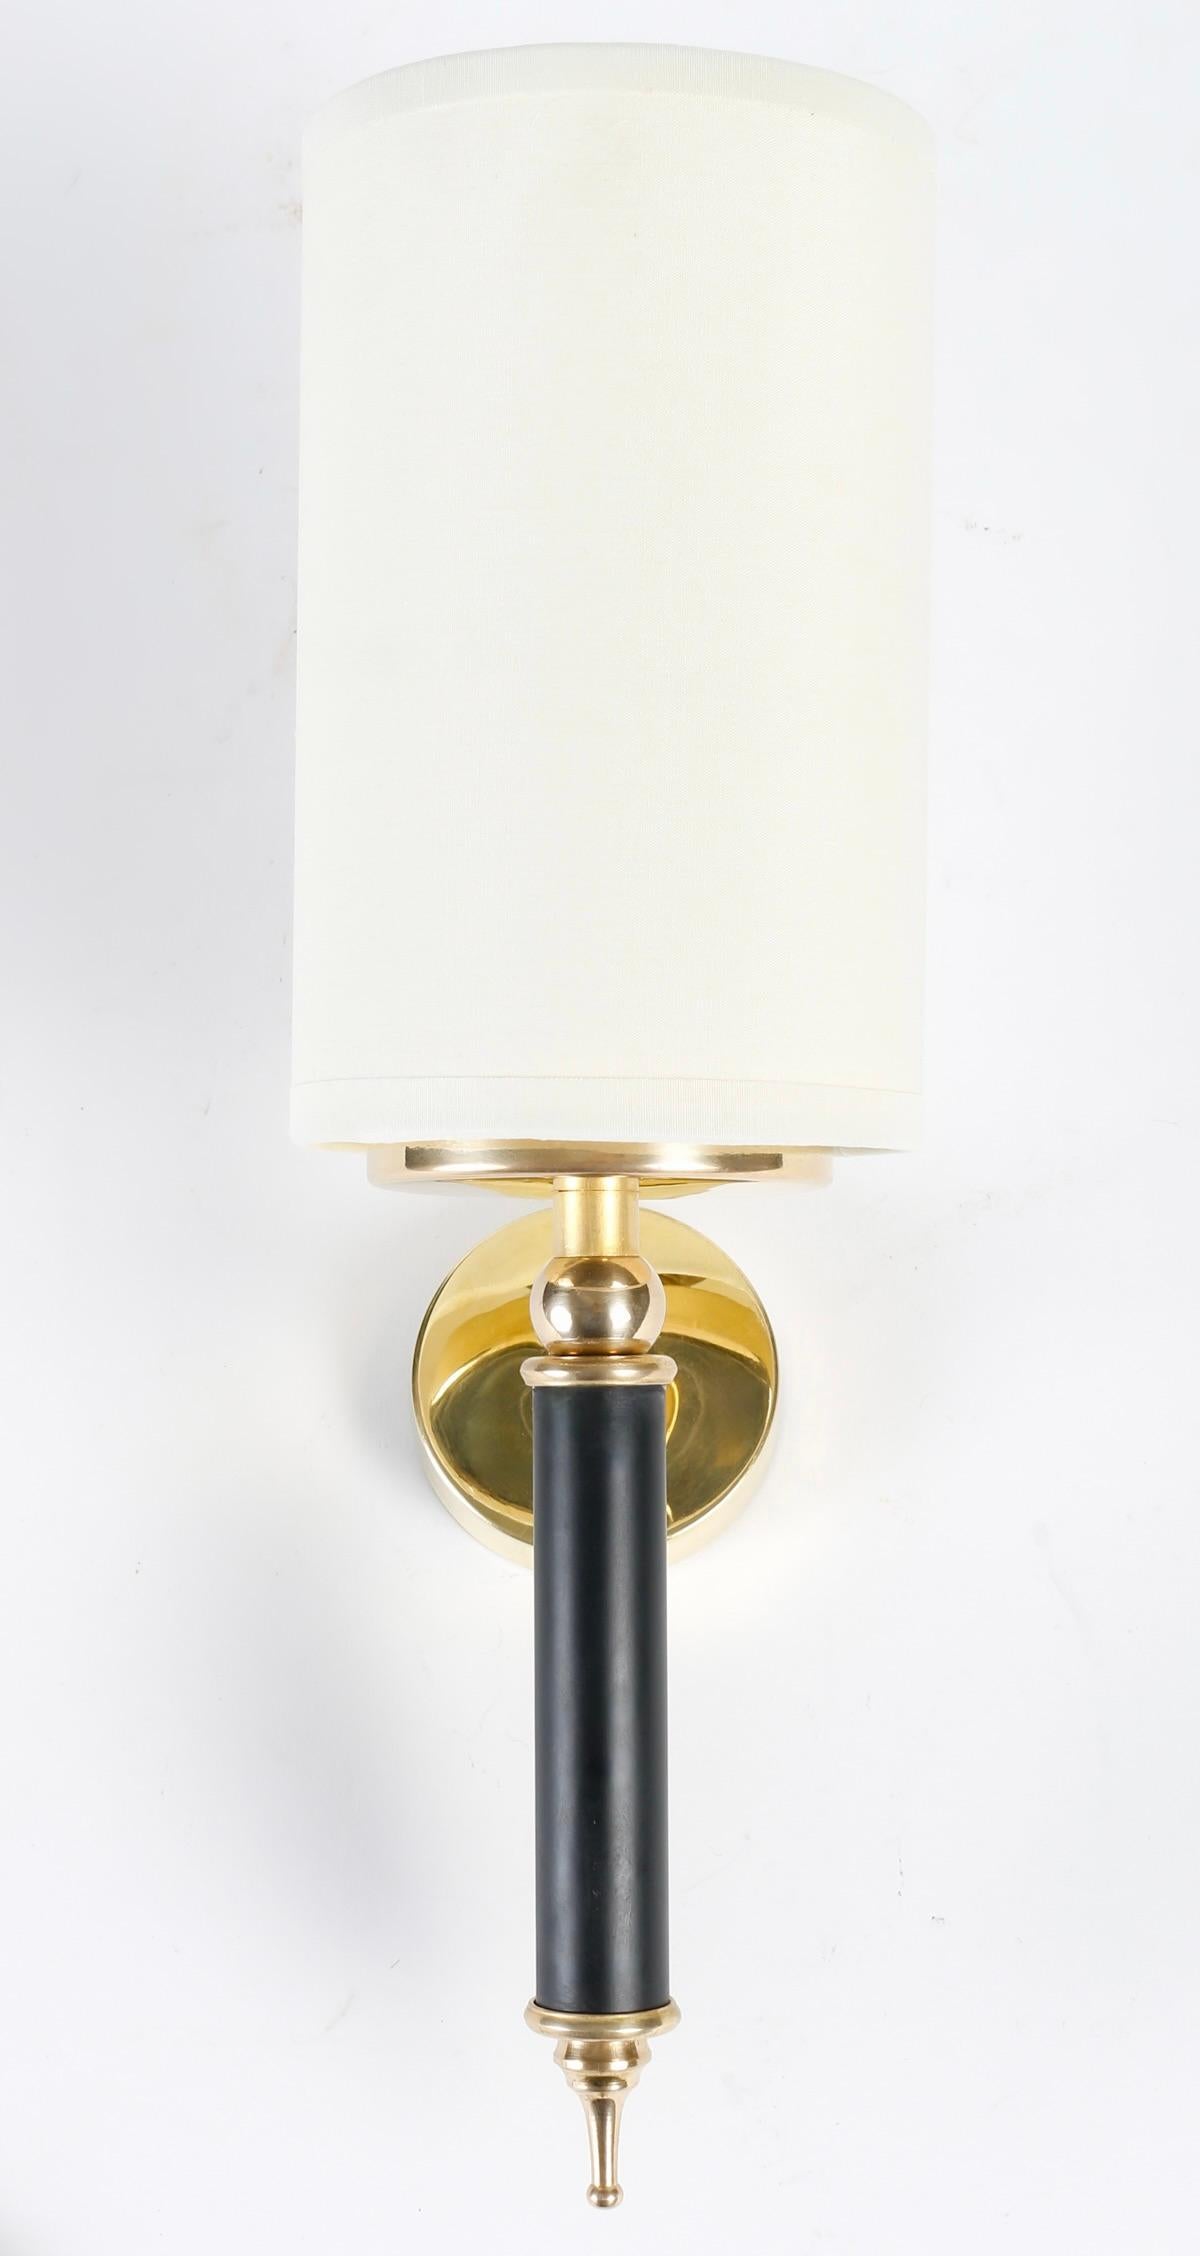 Pair of wall sconces Maison Arlus of the 1950s.
Composed of a cylindrical arm in blackened wood decorated on the lower part with a gilded brass ball ending in a drop and on the upper part with a gilded brass ring on which is placed a light source